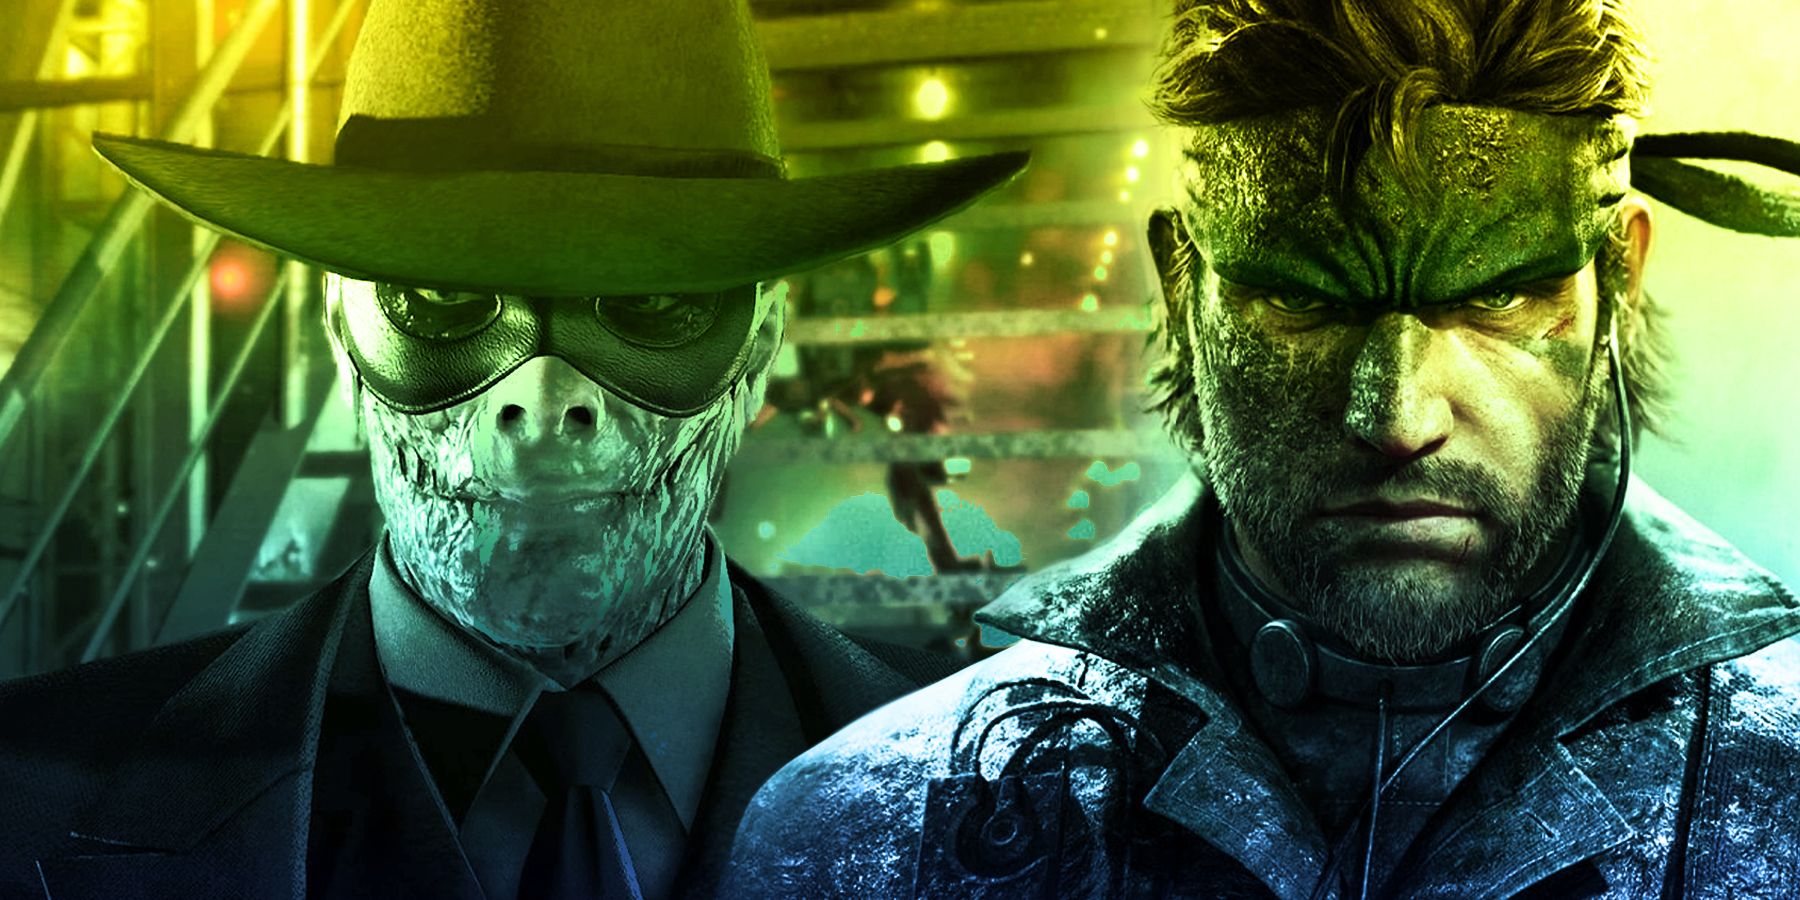 Skull Face and Snake from Metal Gear Solid games